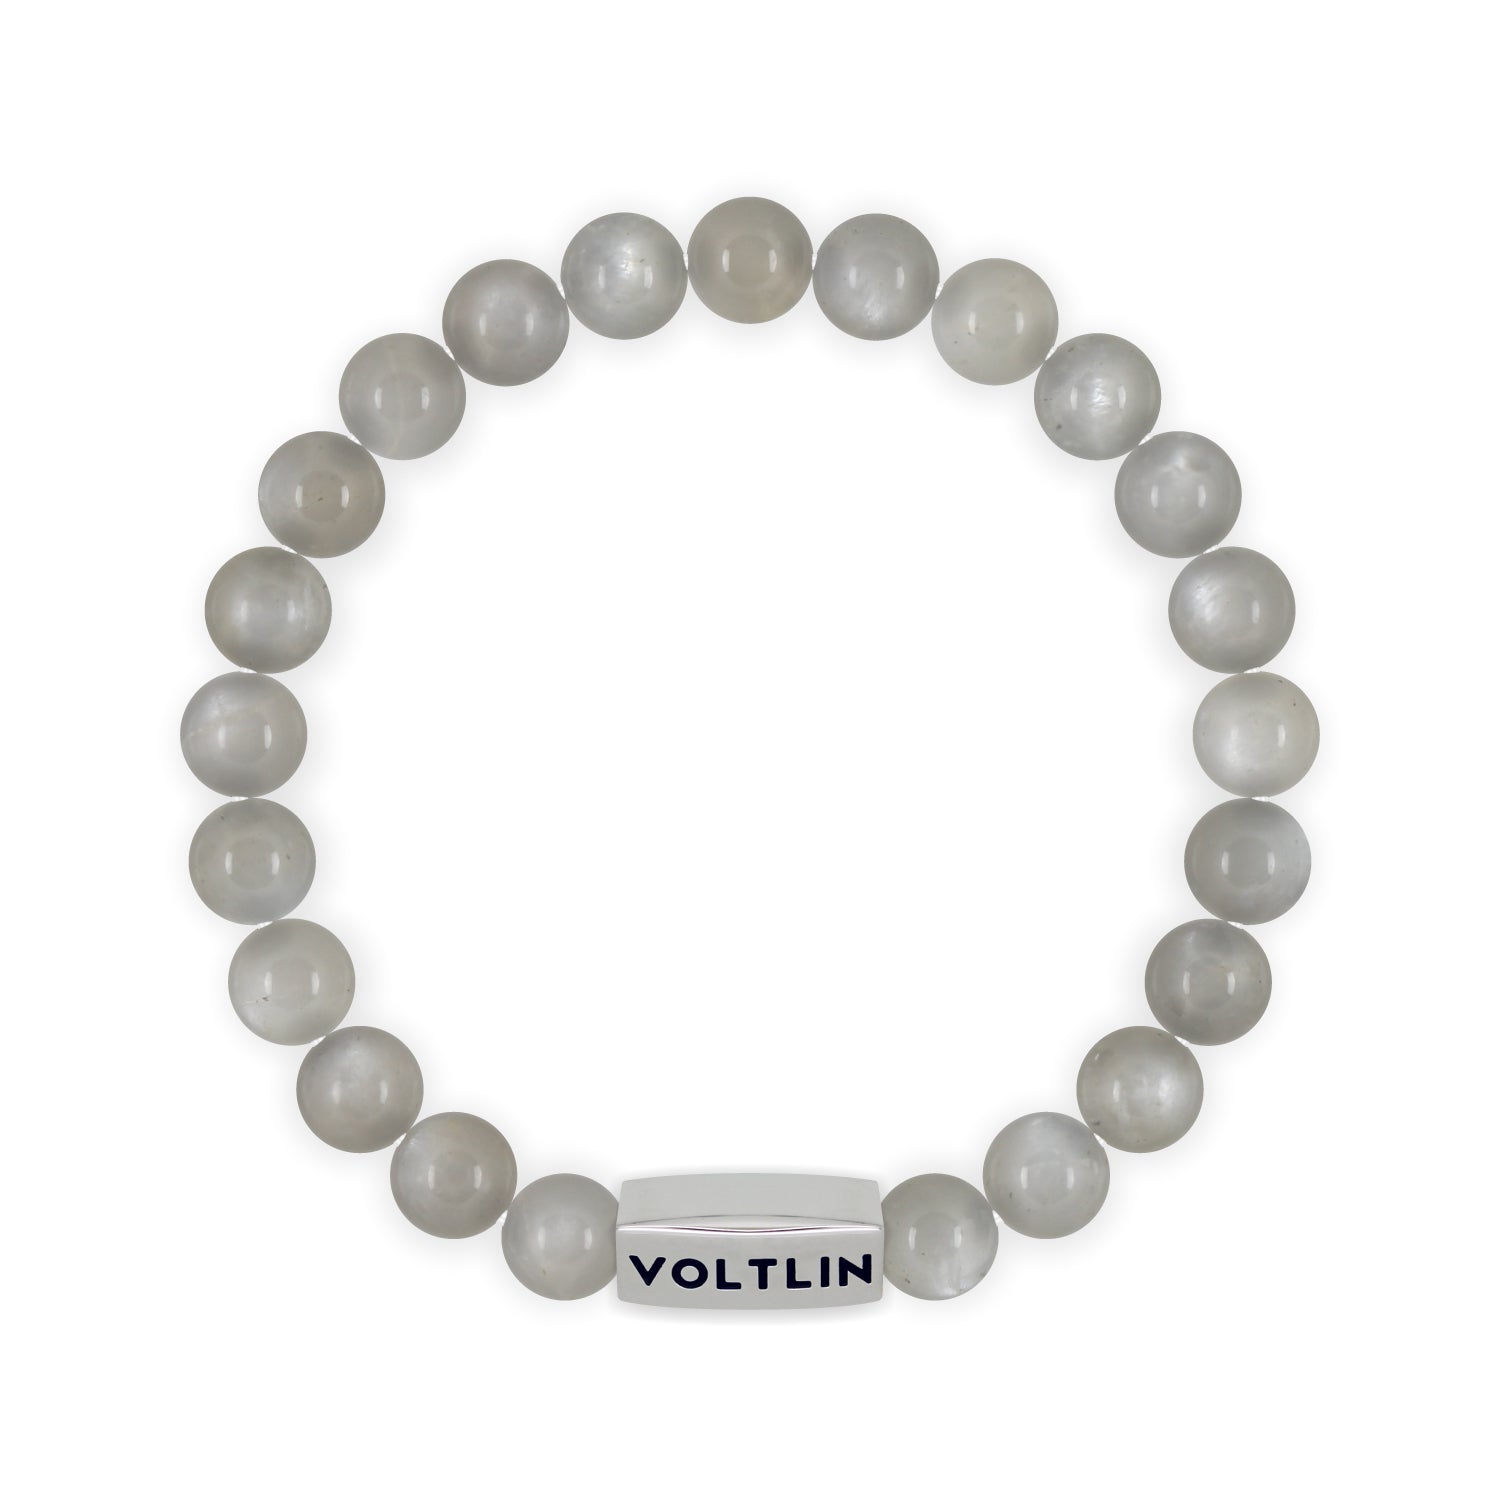 Front view of an 8mm Moonstone beaded stretch bracelet with silver stainless steel logo bead made by Voltlin